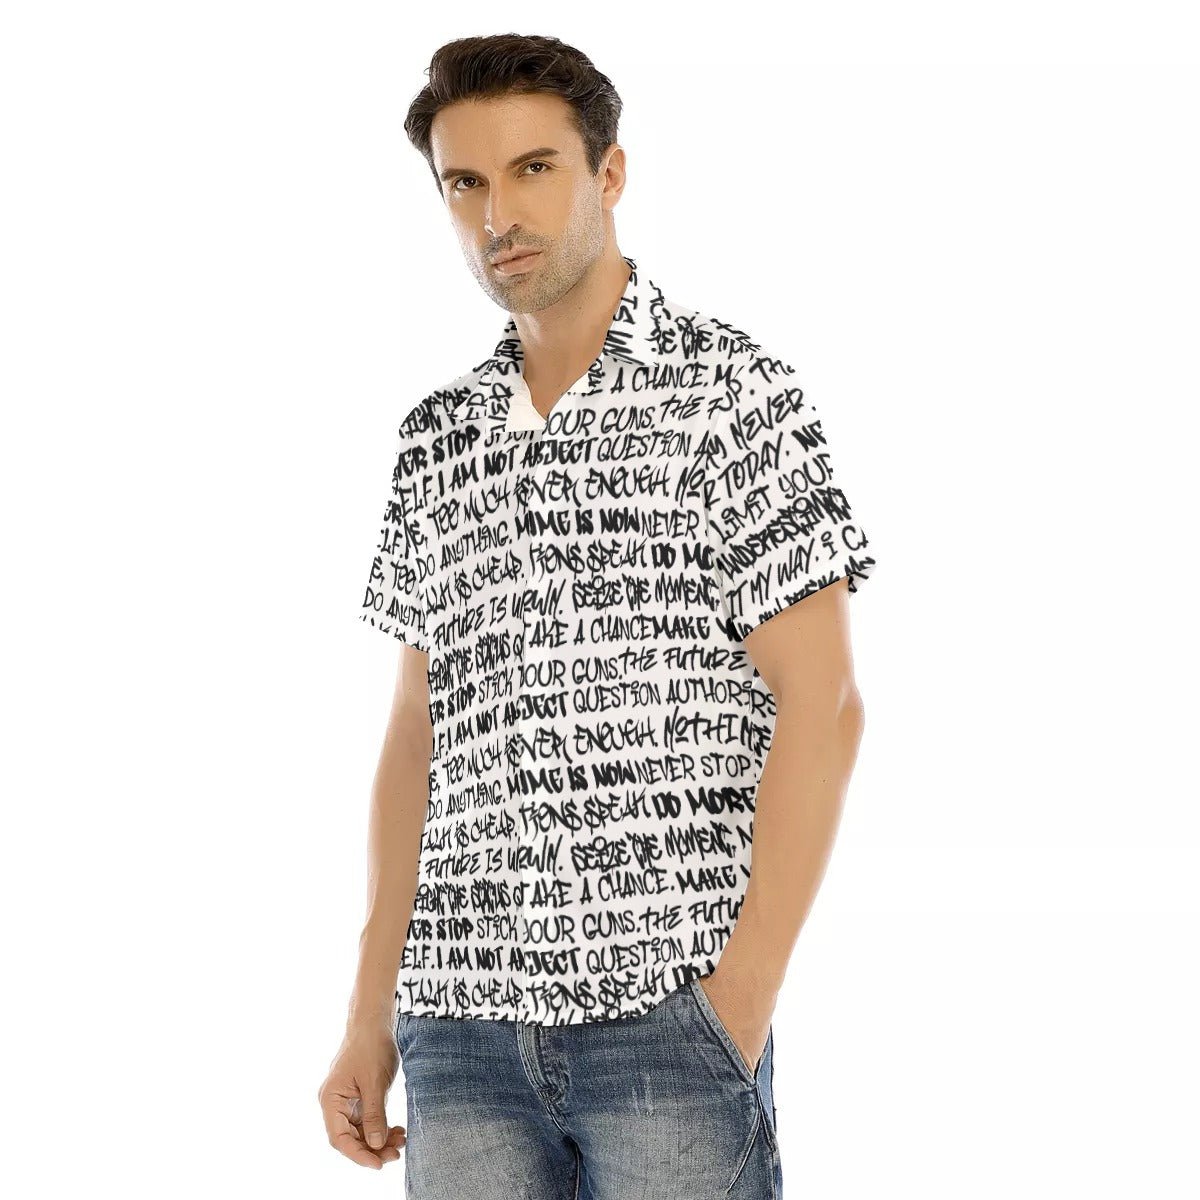 All-Over Print Men's Lapel Collar Short Sleeve T-shirt With Concealed Placket